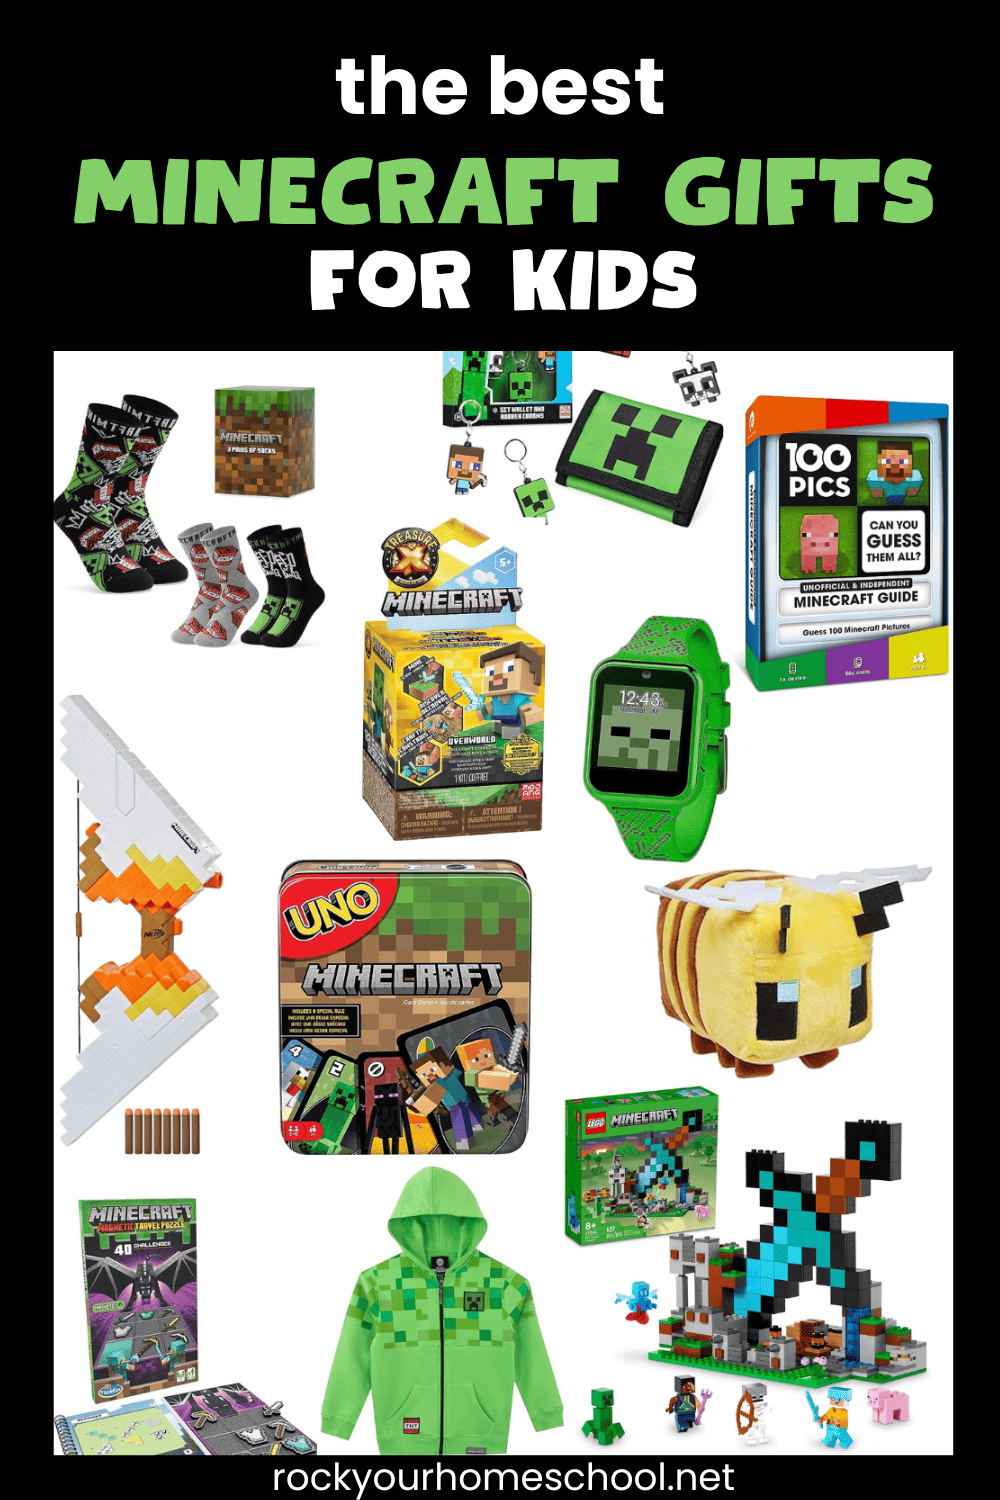 Minecraft Gifts for Kids: 20 Cool Ideas That Fans Will Totally Dig